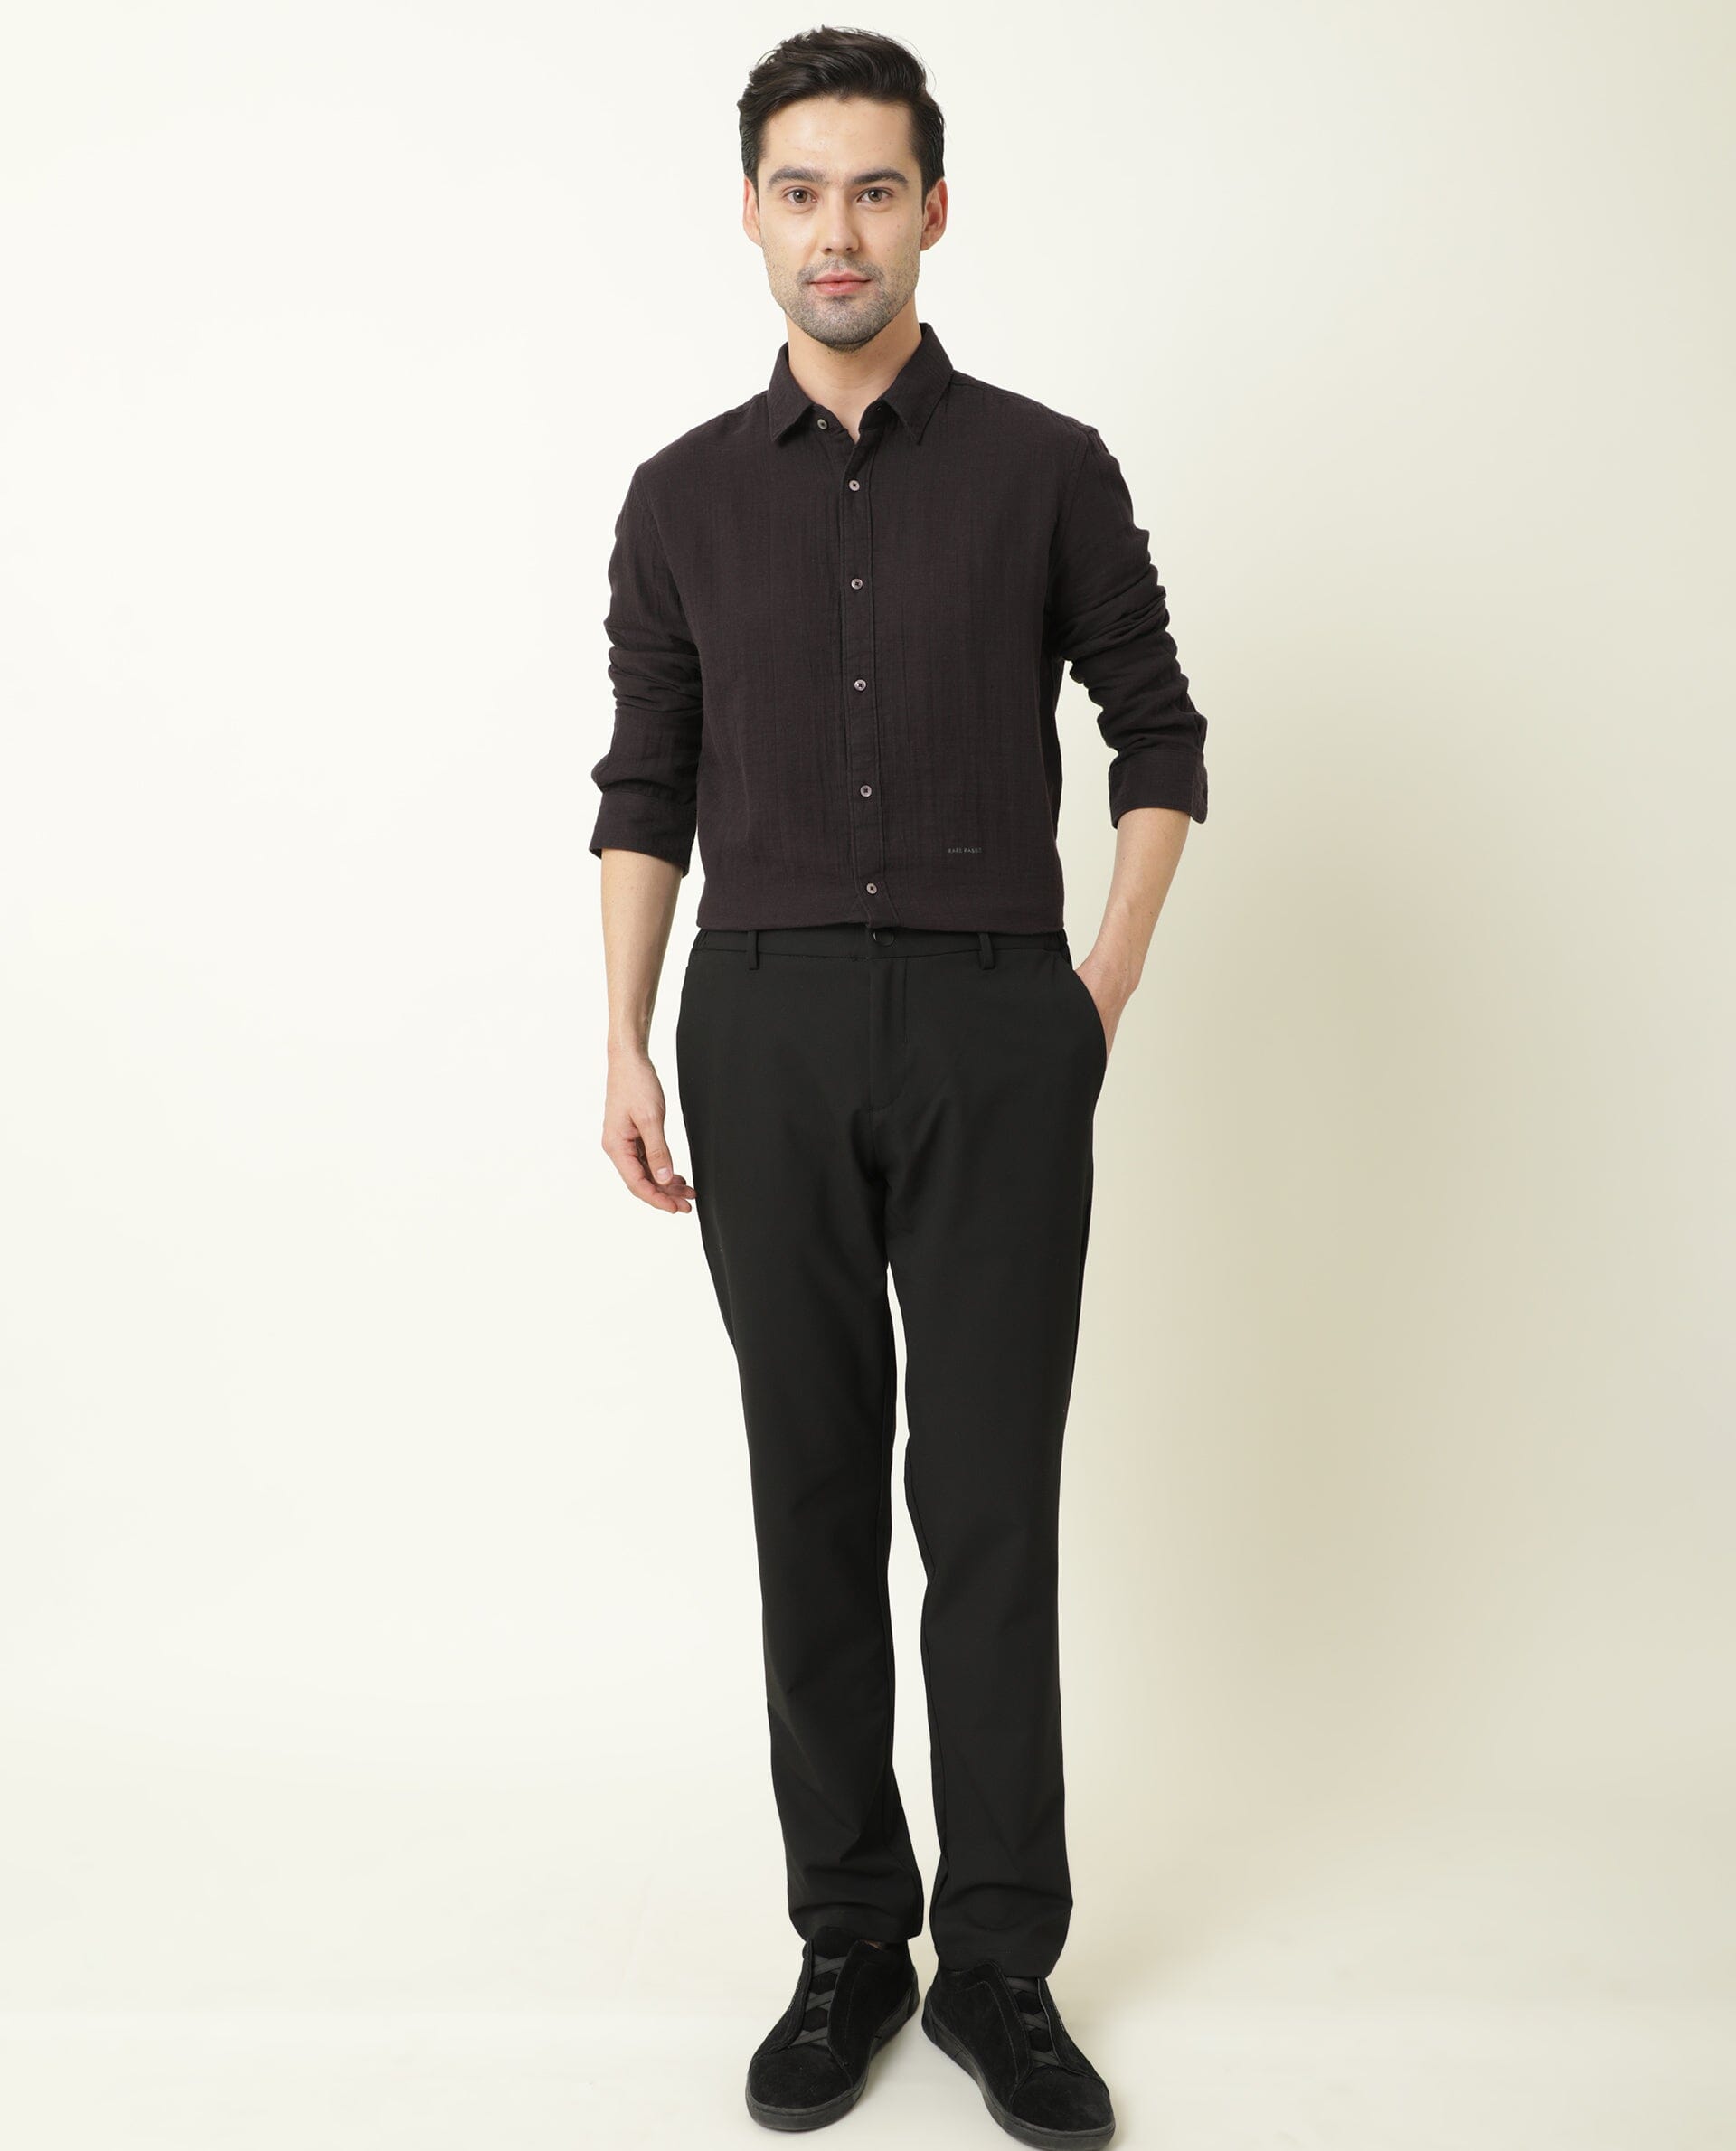 Can I wear a purple shirt with black pants? - Quora